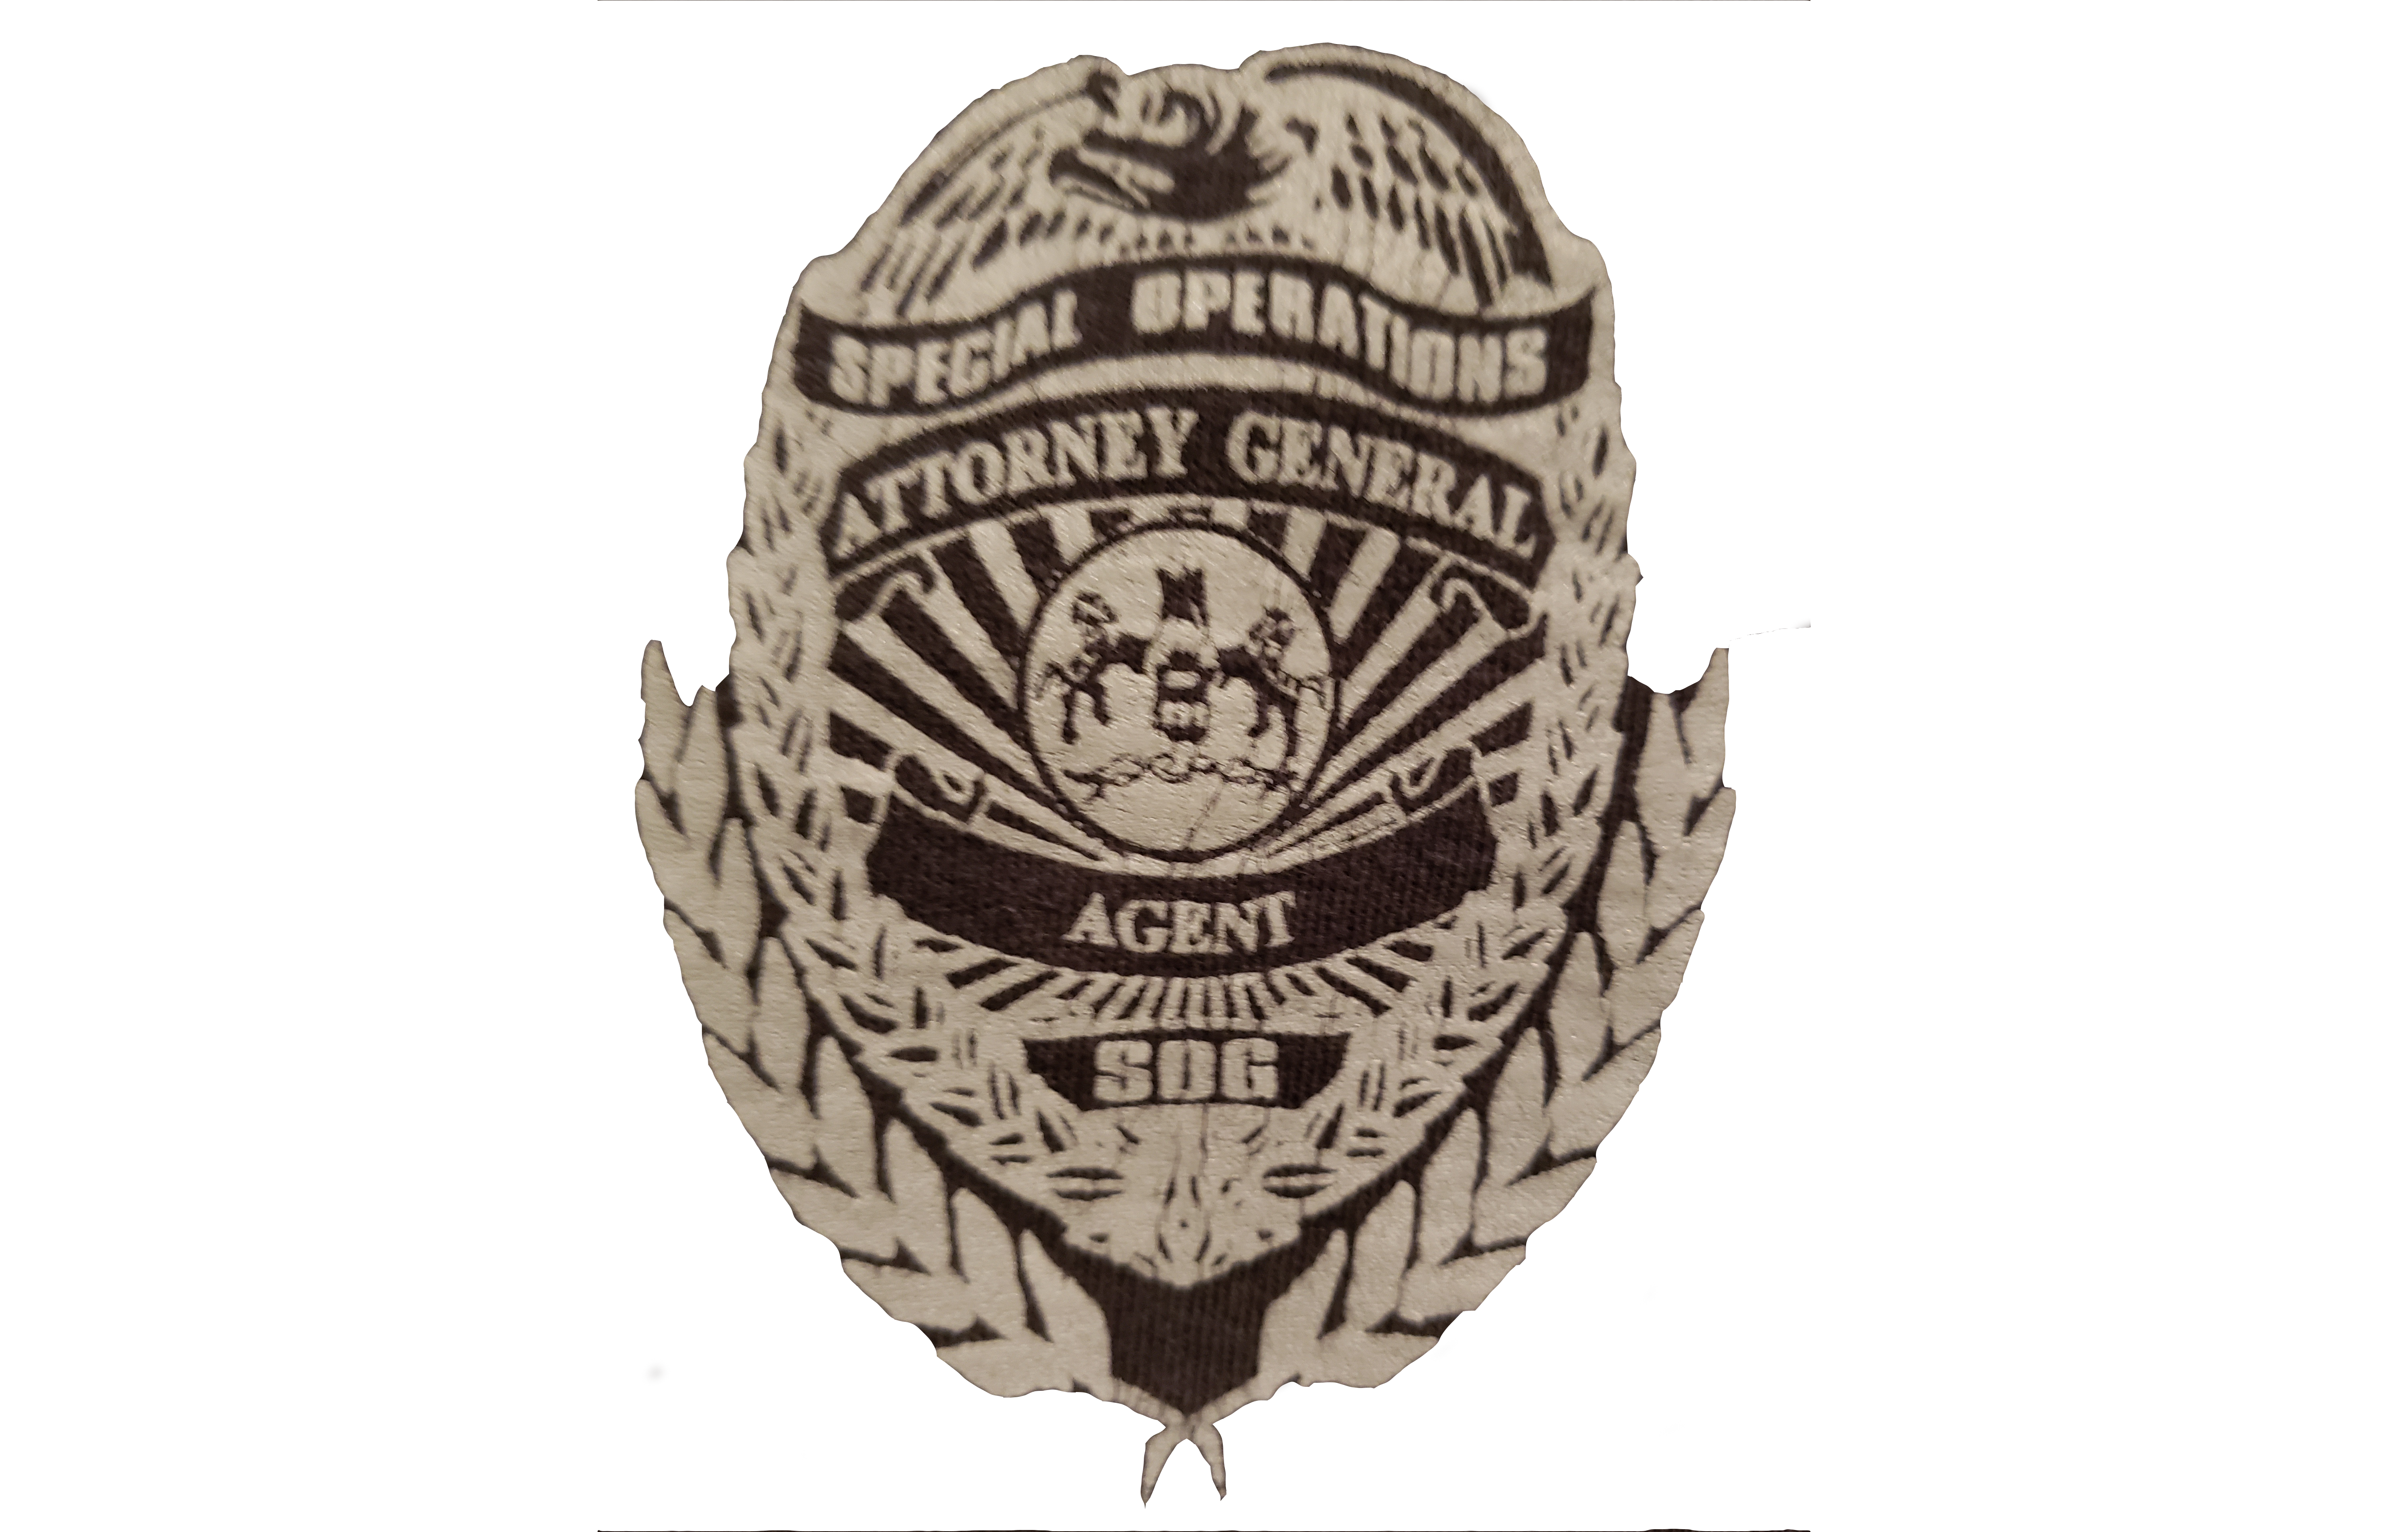 PA Special Operations Attorney General Agent